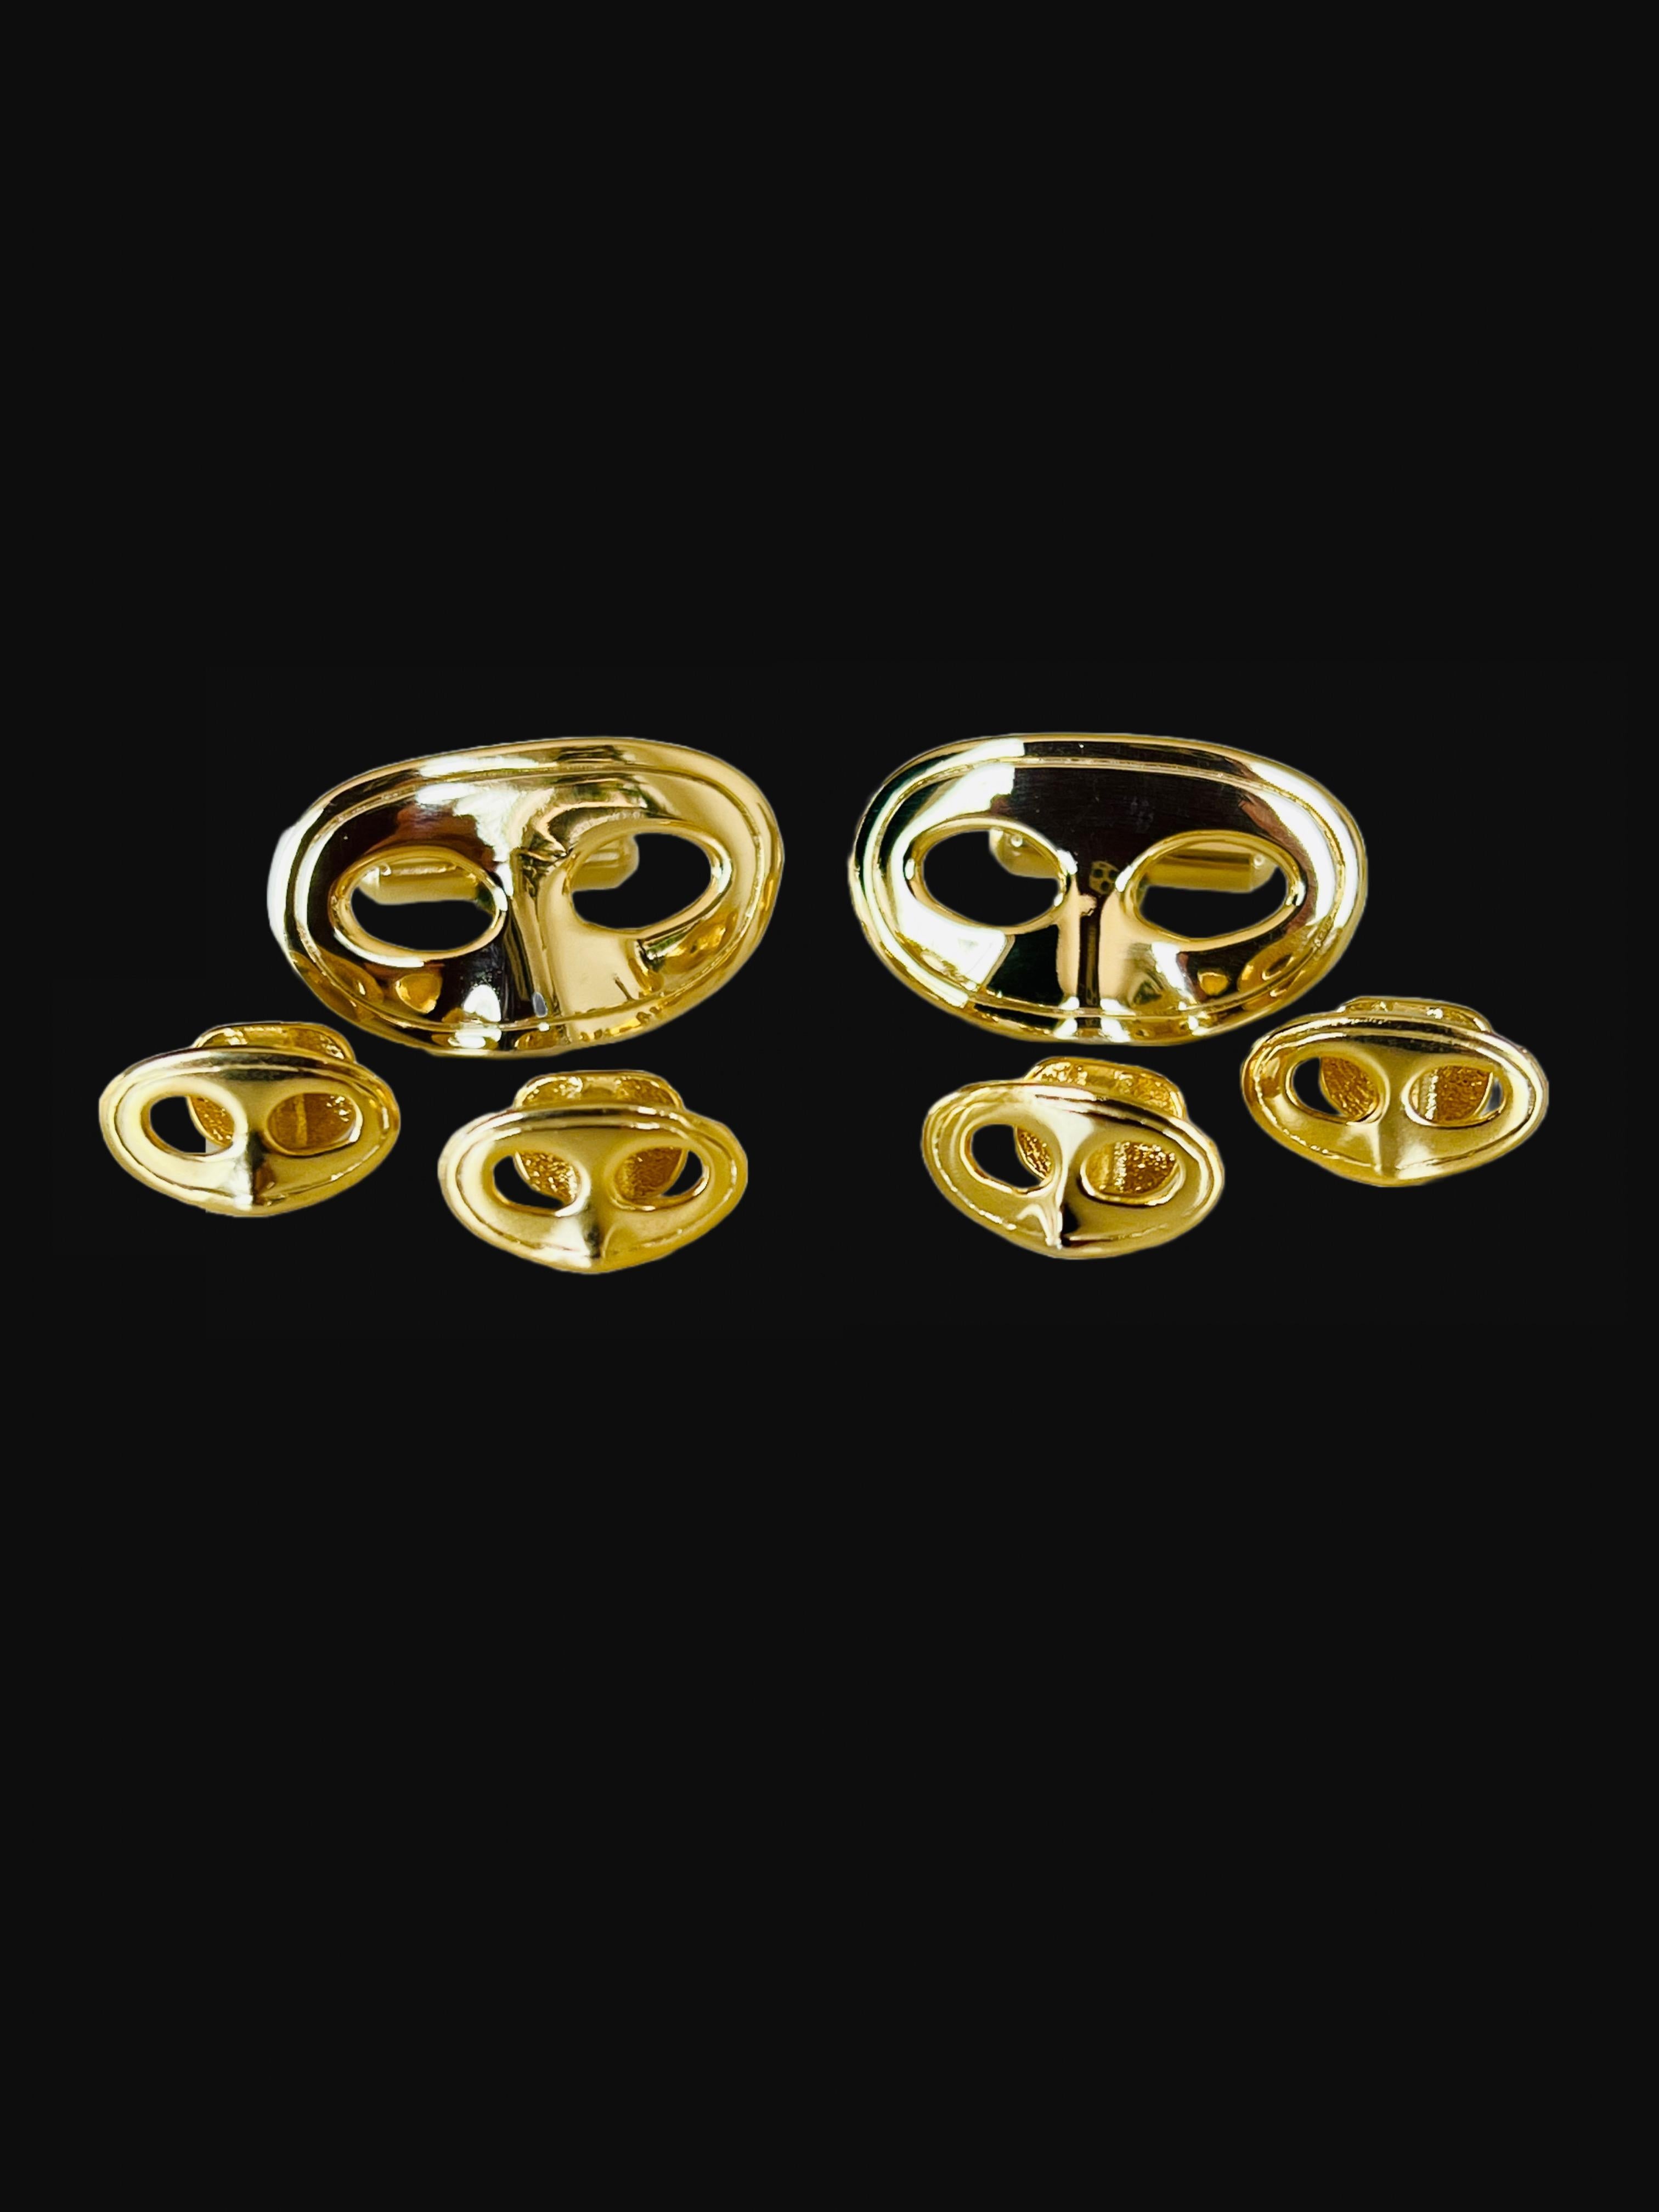 Add some flair to your formal attire with these vintage gold masquerade mask cufflinks and matching tuxedo shirt studs. Made from a rich gold plated metal, they are the perfect accessory for any theater, opera, or party event. The Masquerade theme